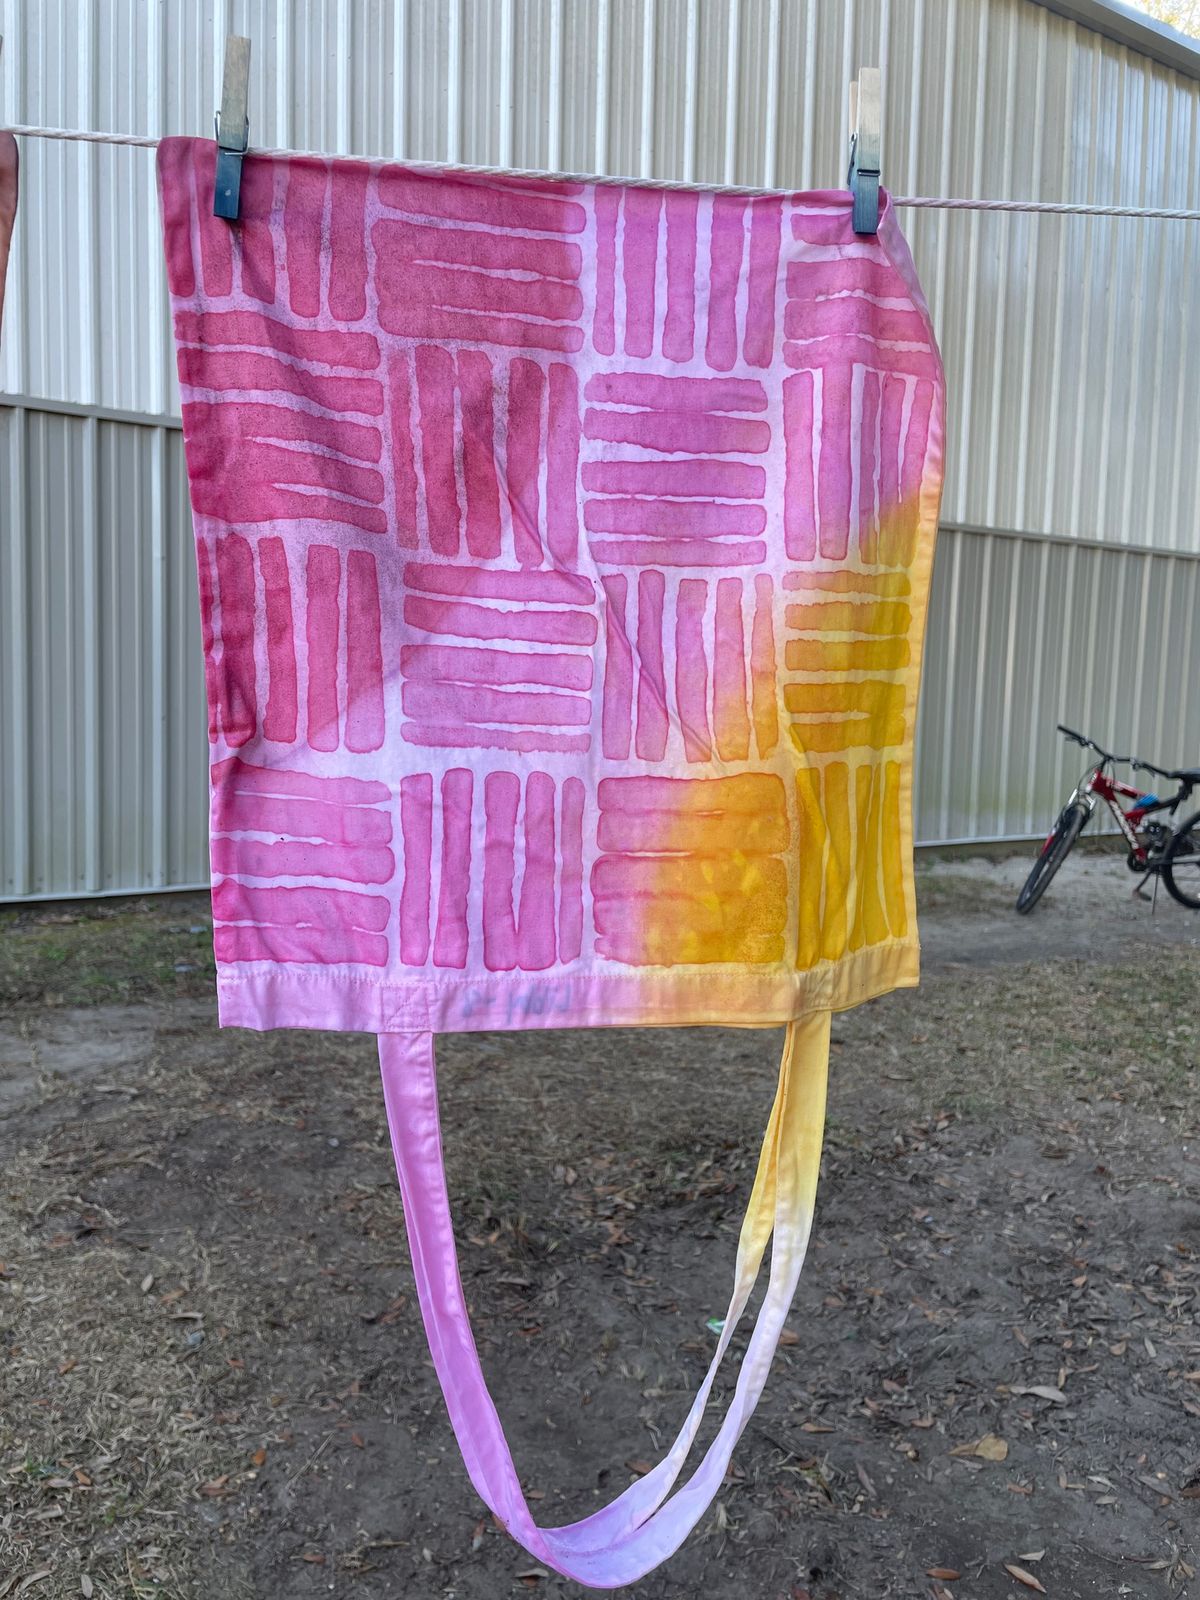 Invisible Ink: Printing with Mordants and Natural Dyeing with Local Artist Kristy Bishop